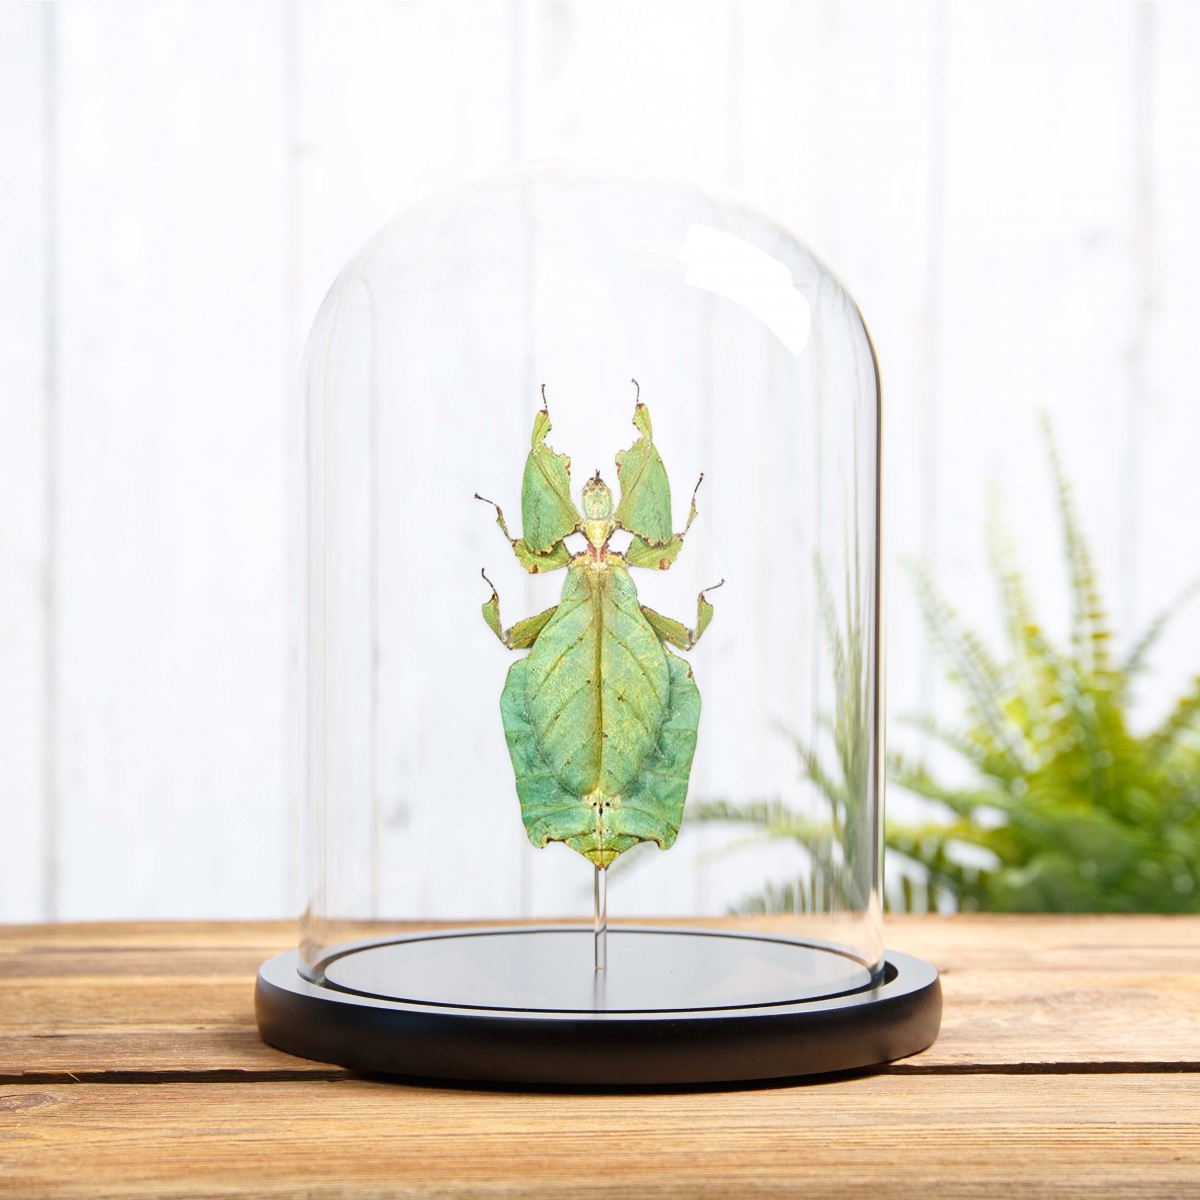 Minibeast Giant Leaf Insect in Glass Dome with Wooden Base (Phyllium giganteum)